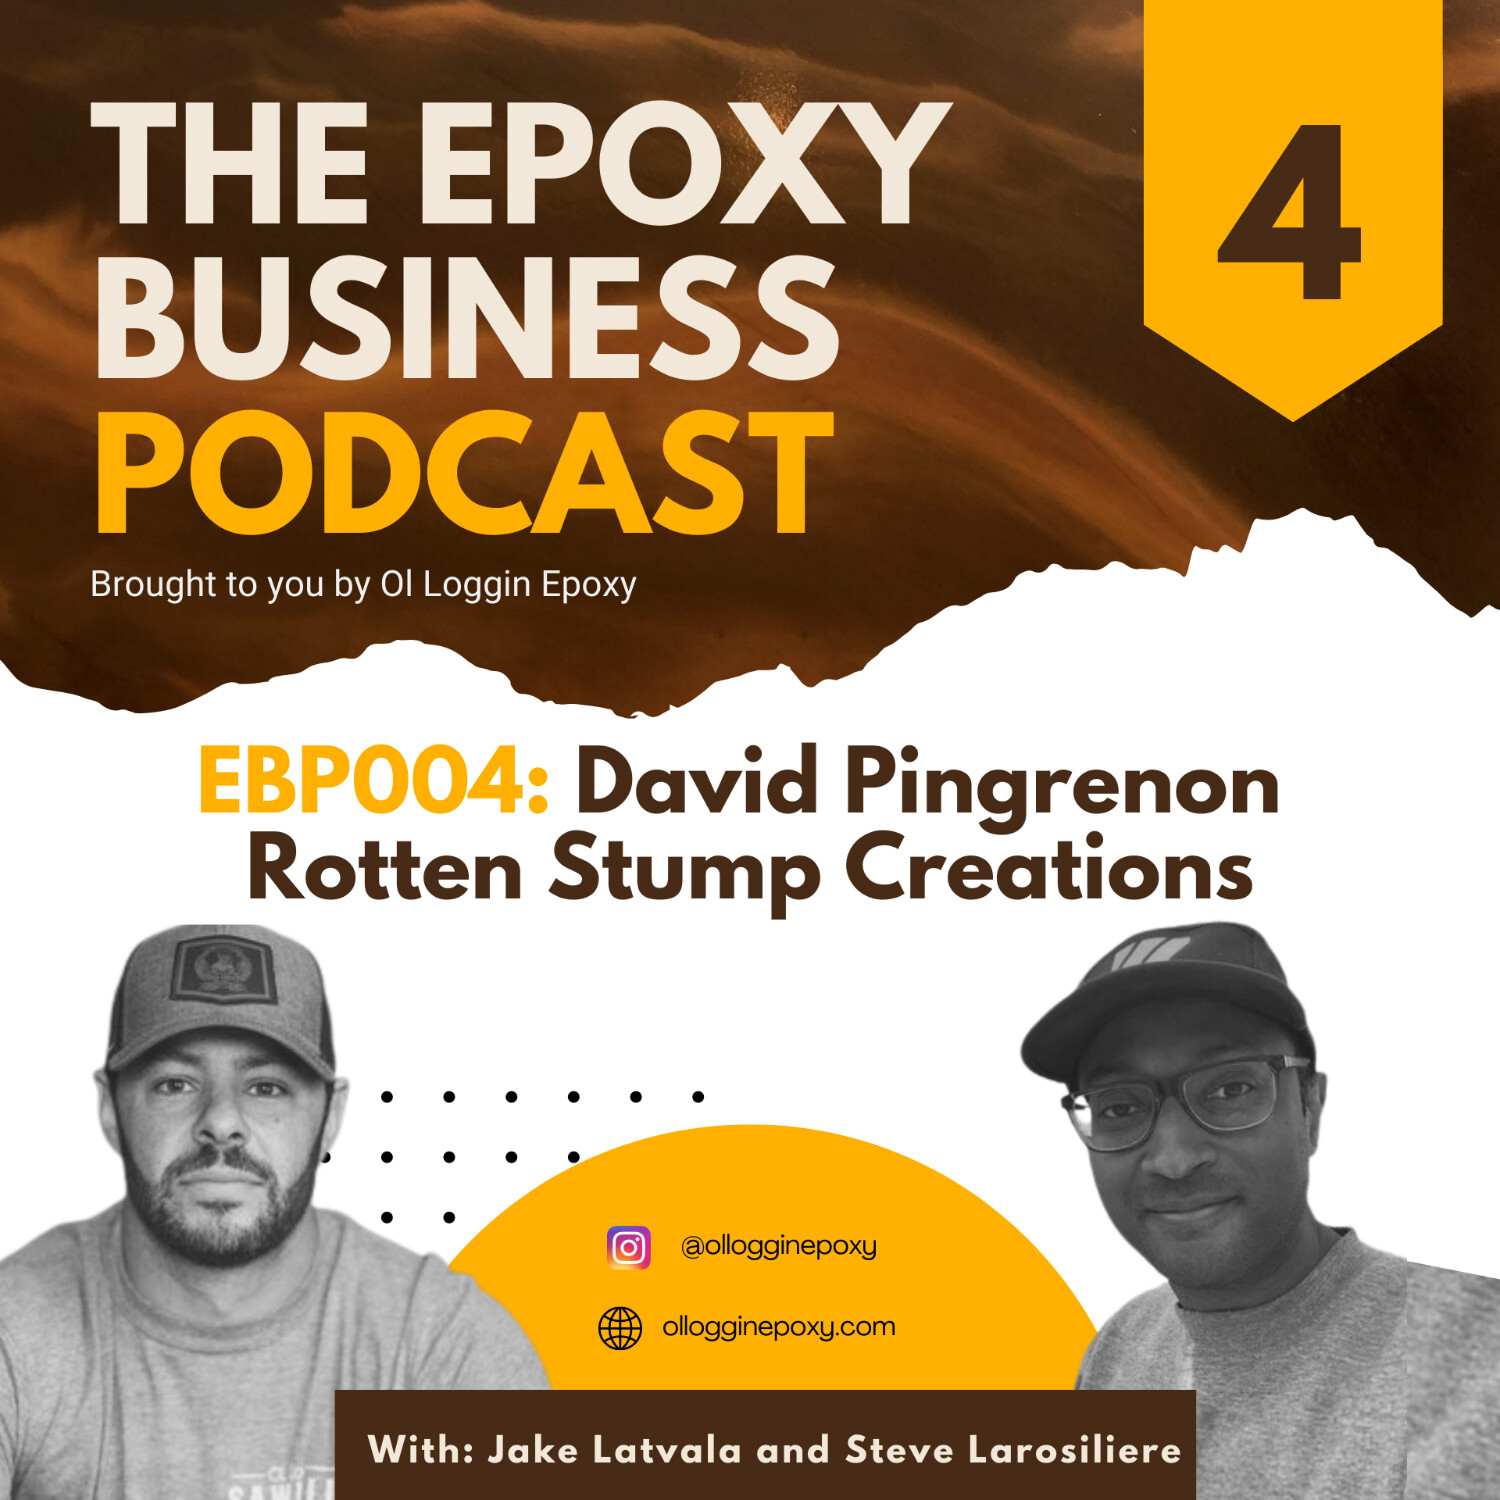 EBP004: Building Brand Recognition with David Pingrenon